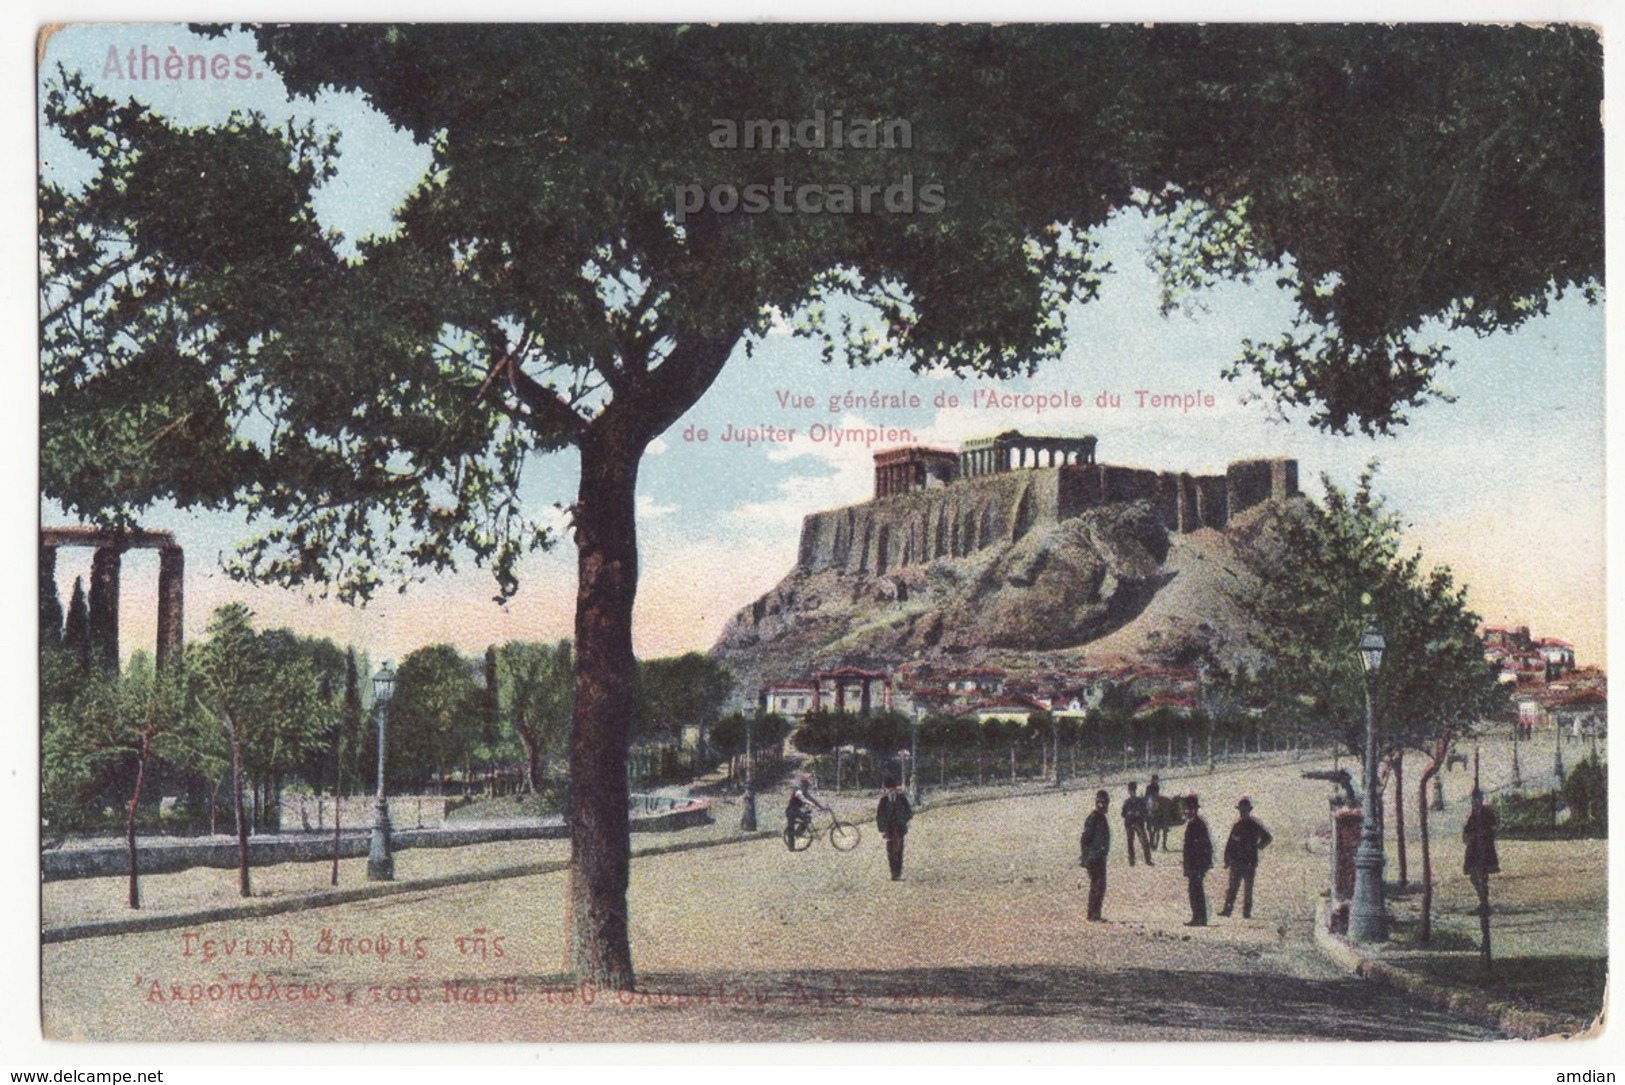 GREECE ATHENS VIEW OF ACROPOLIS From THE TEMPLE OF OLYMPIAN ZEUS 1900s Antique Color Postcard - Greece